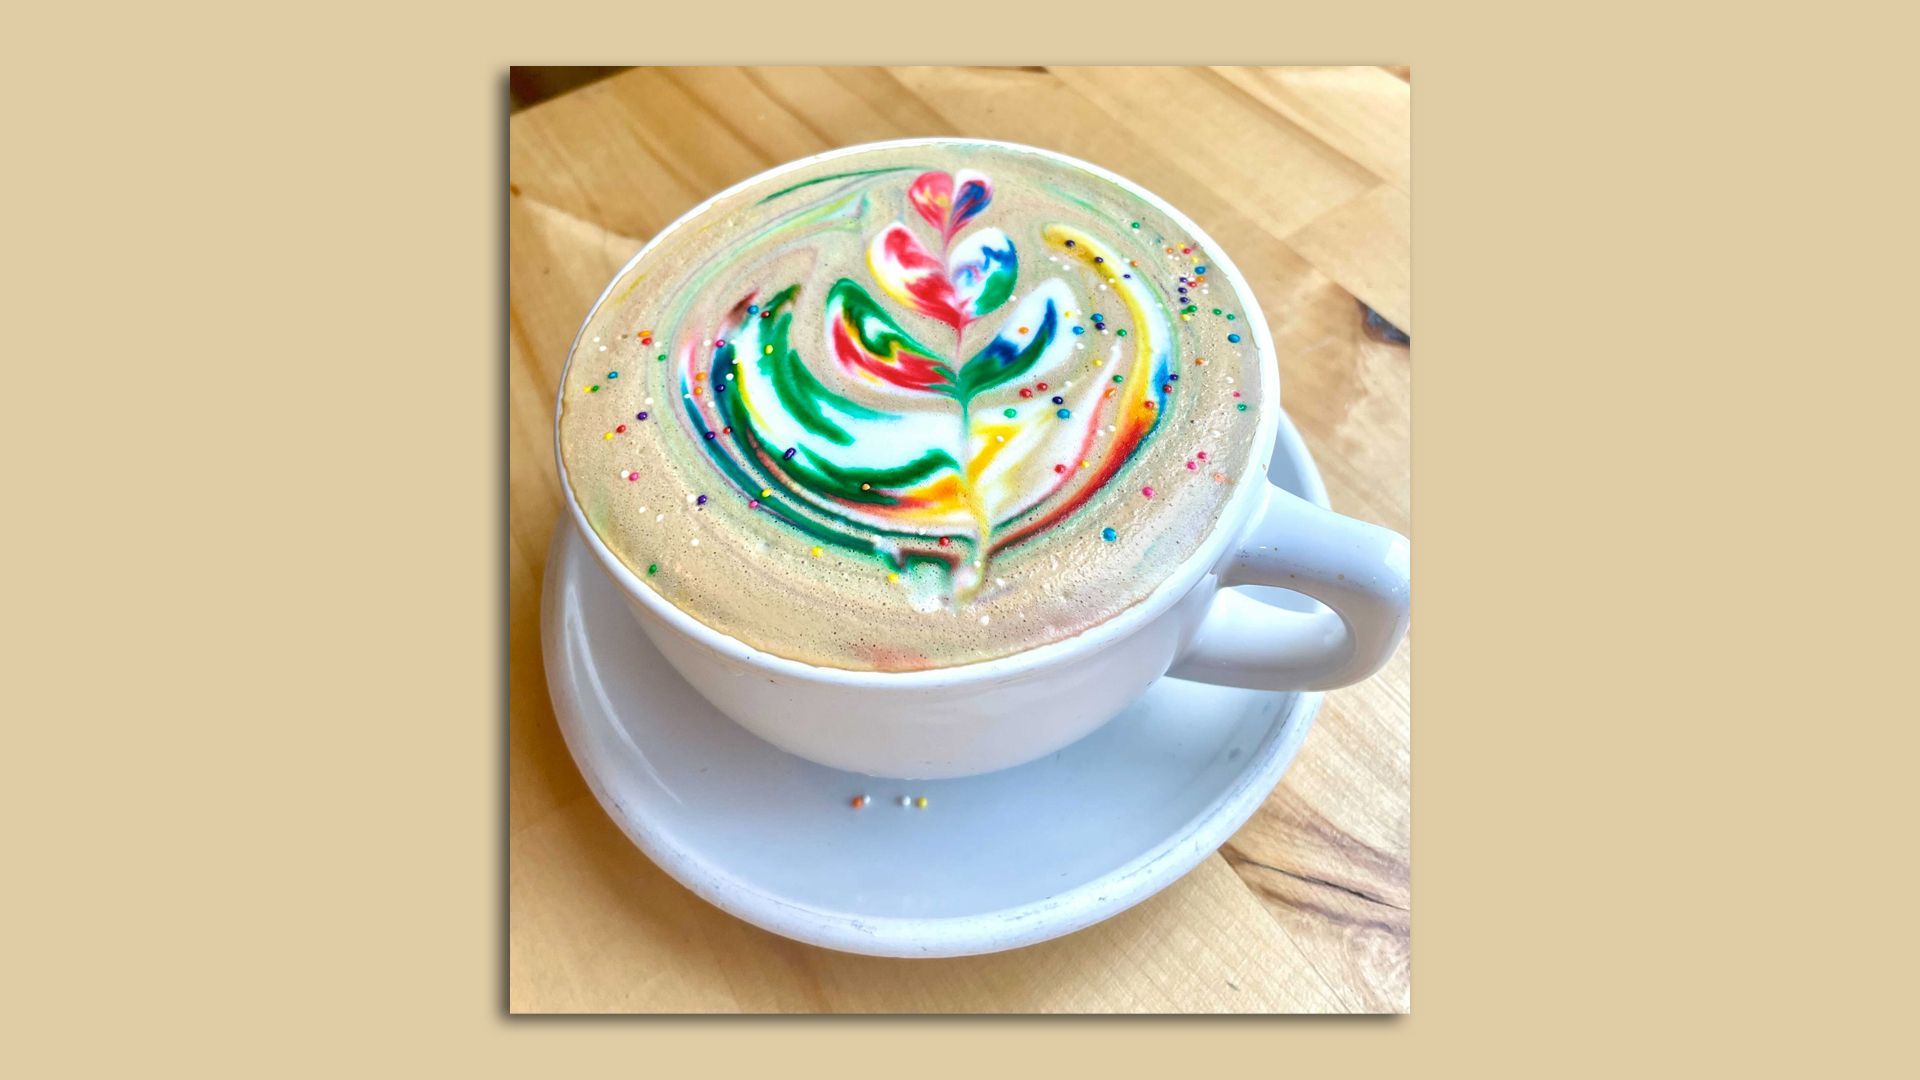 latte with rainbow design and candy sprinkles on top on wooden table